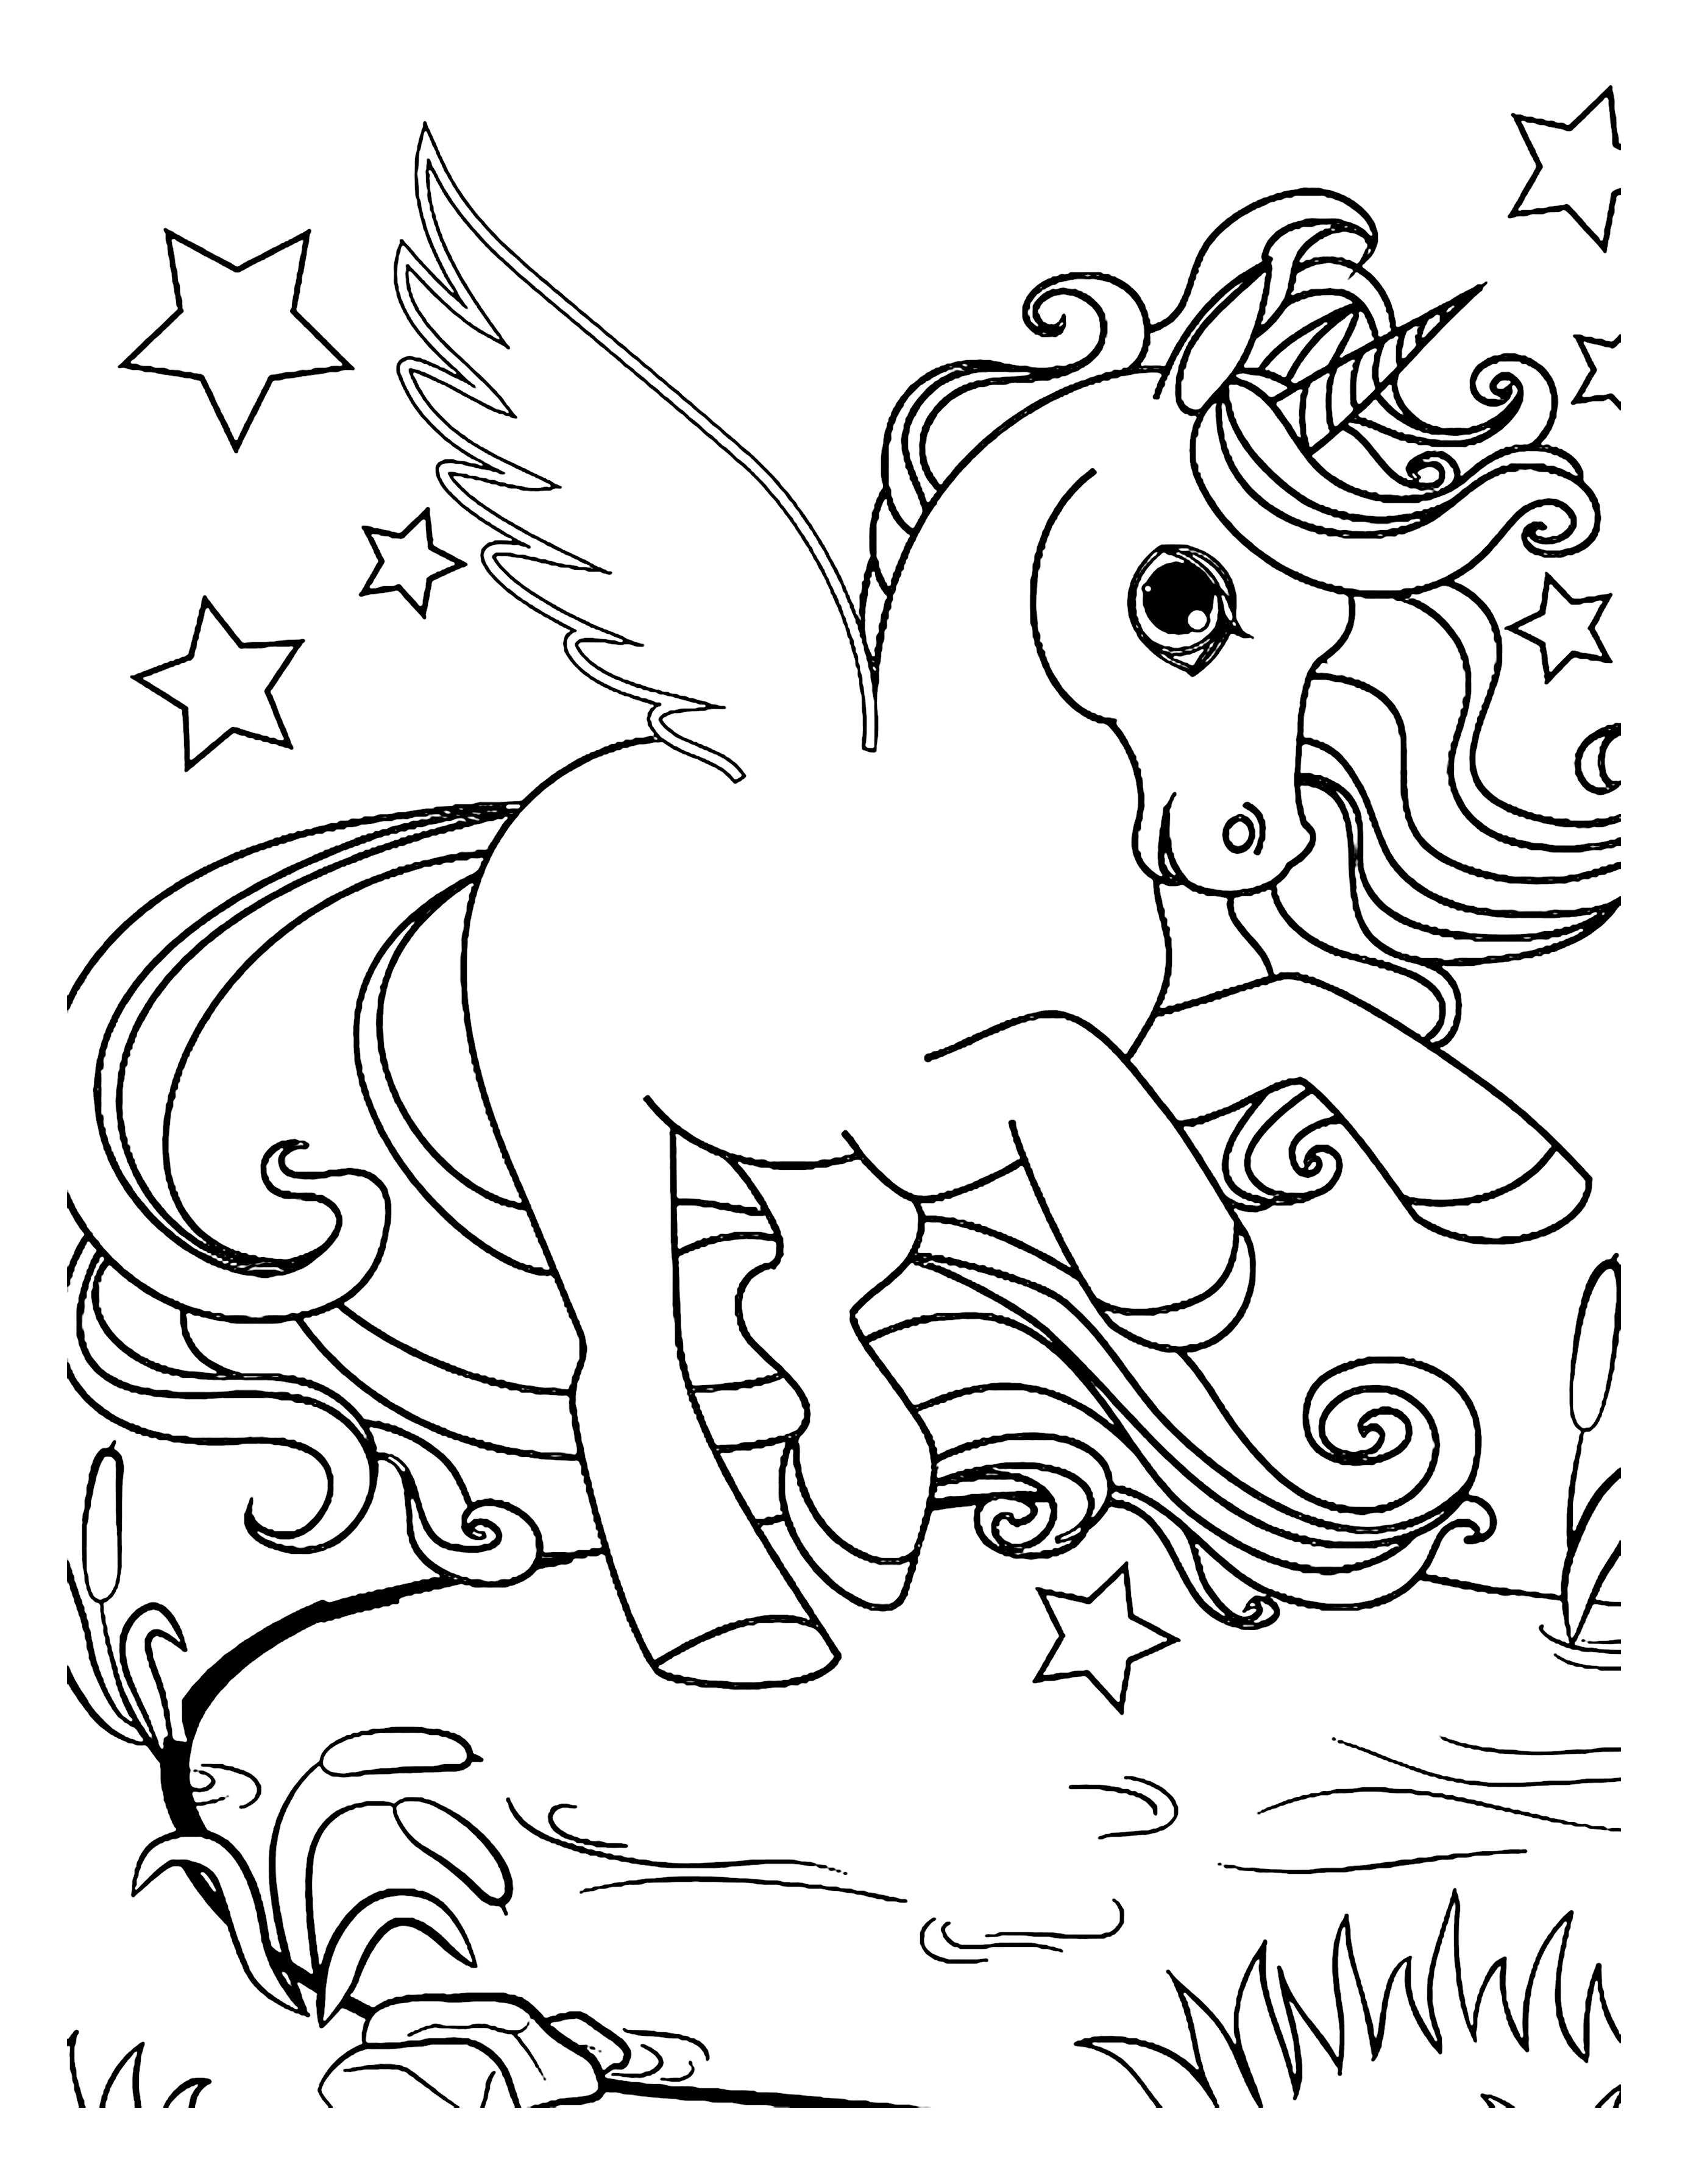 100+ Unicorn Coloring Pages For Kids | Unicorn coloring pages, Mandala coloring  pages, Coloring pages